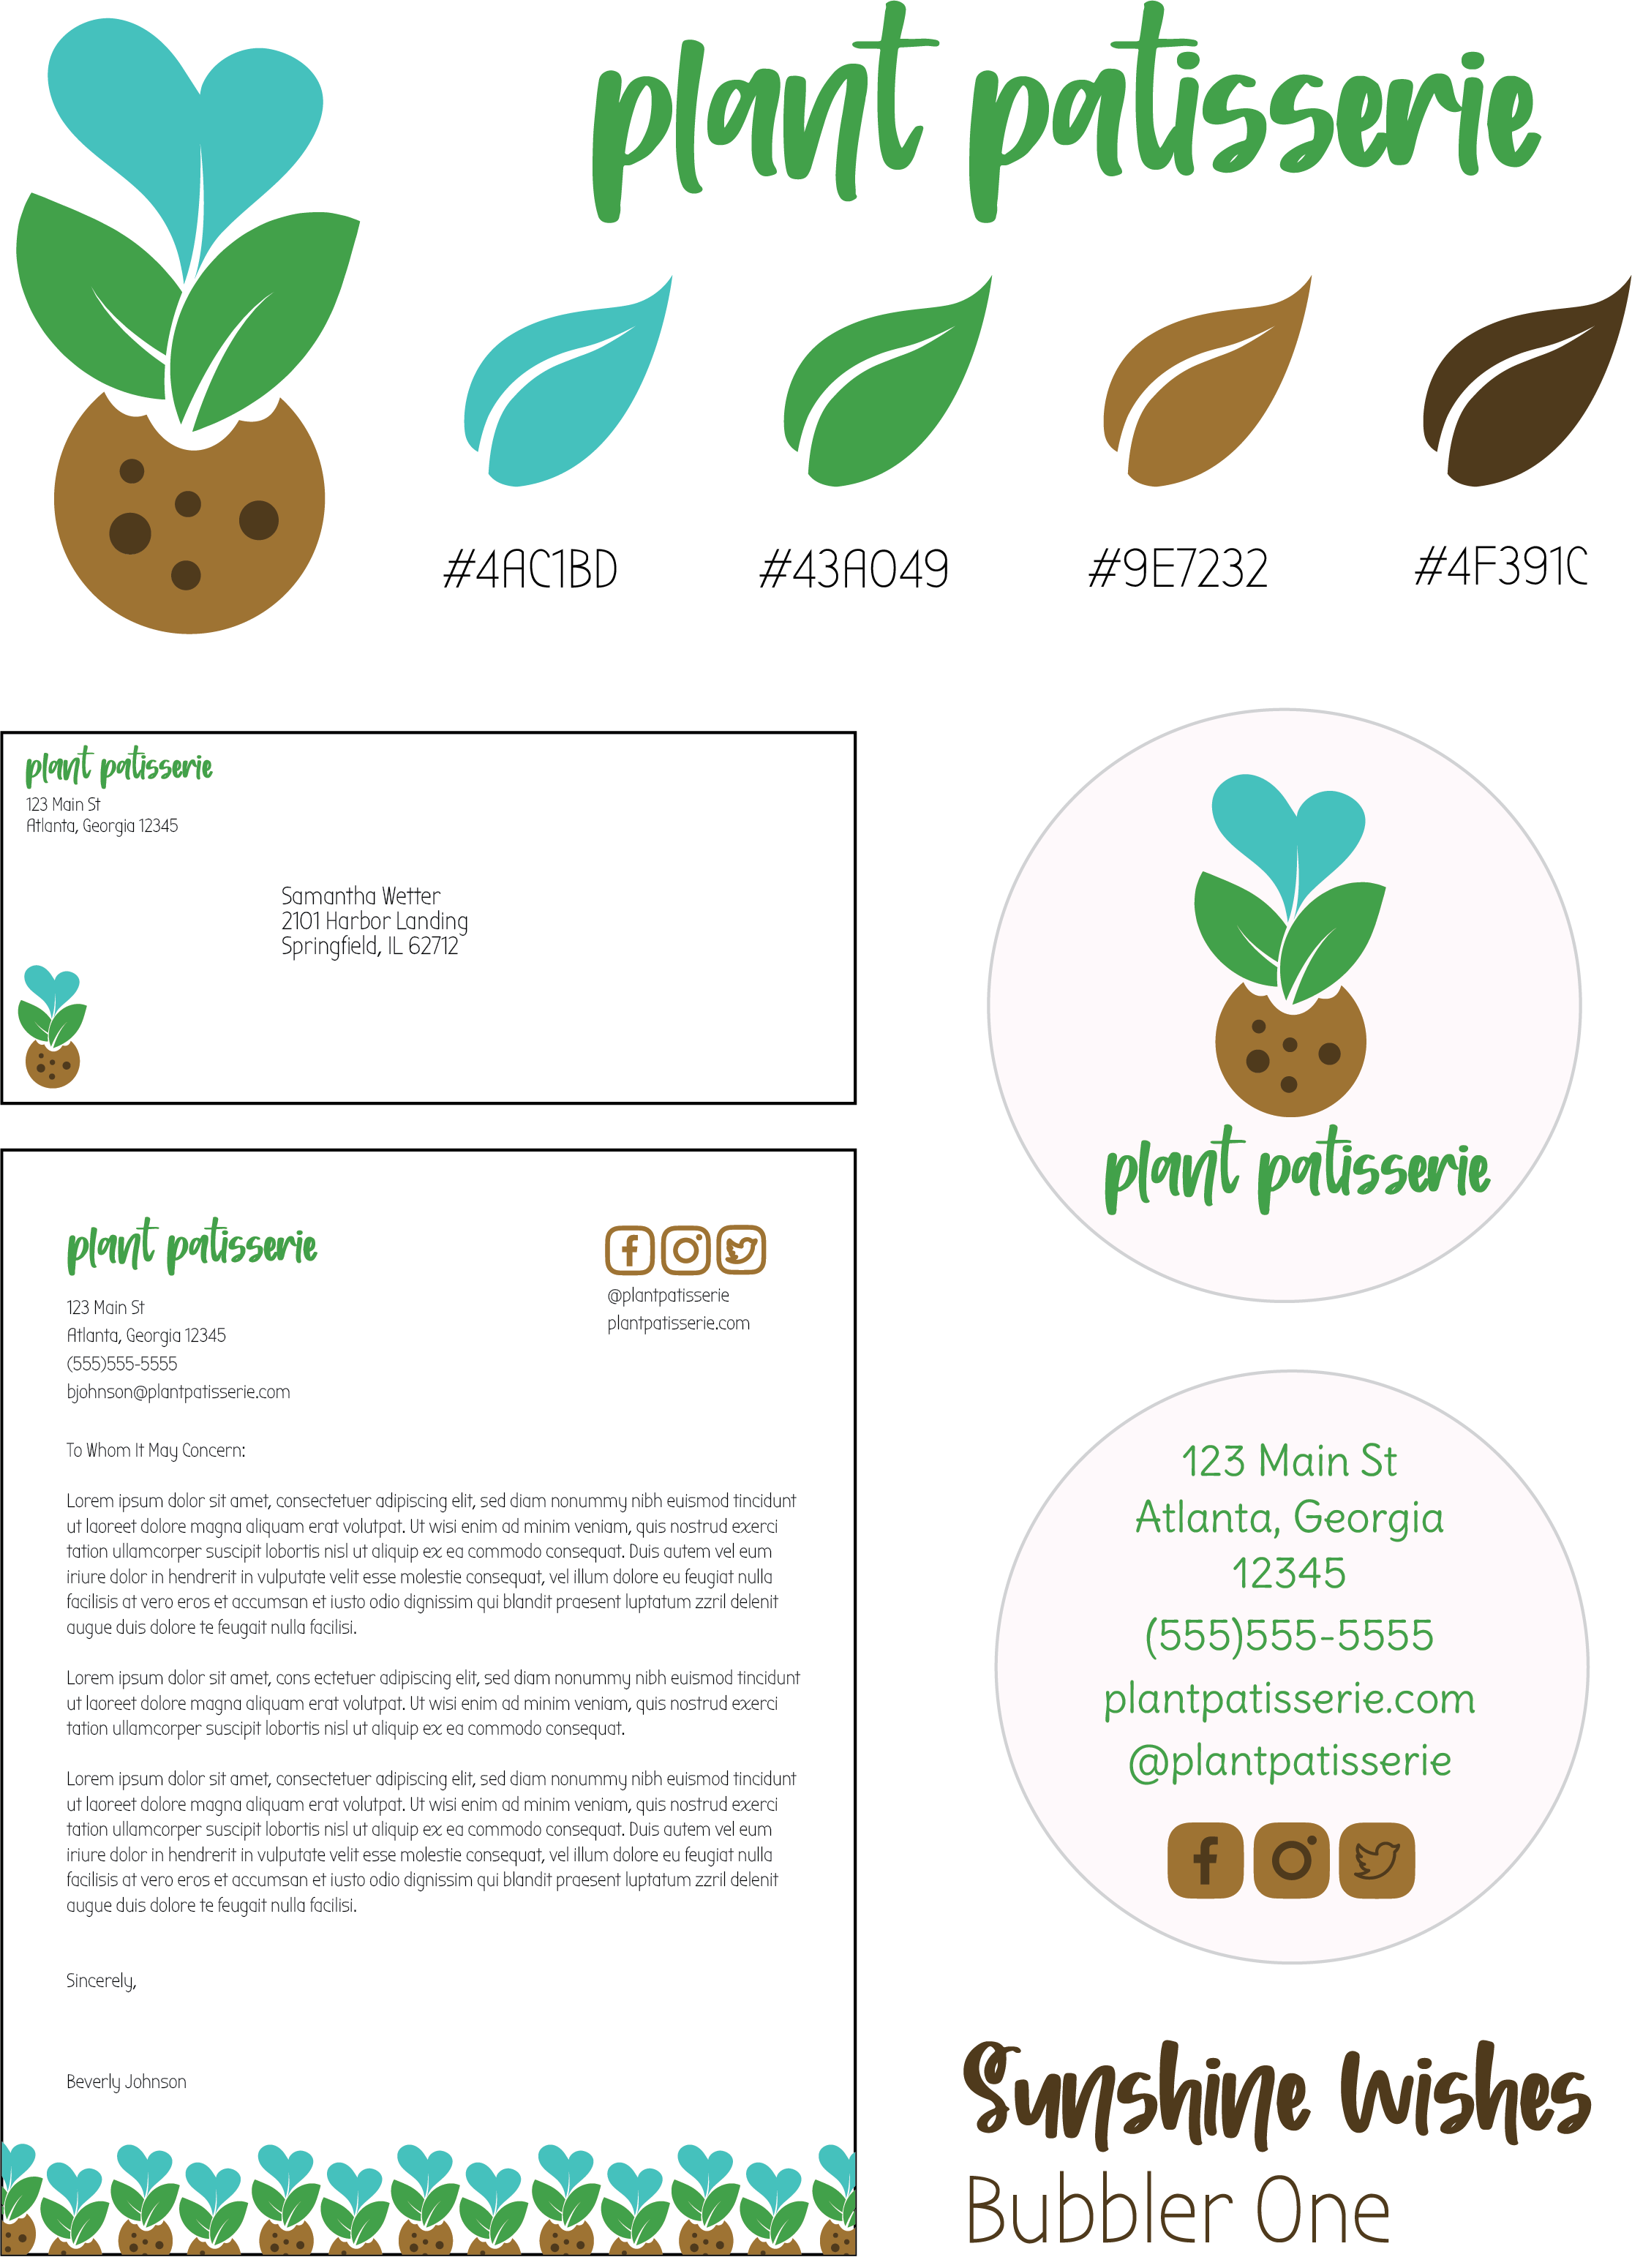 Overview of the design elements for Plant Patisserie